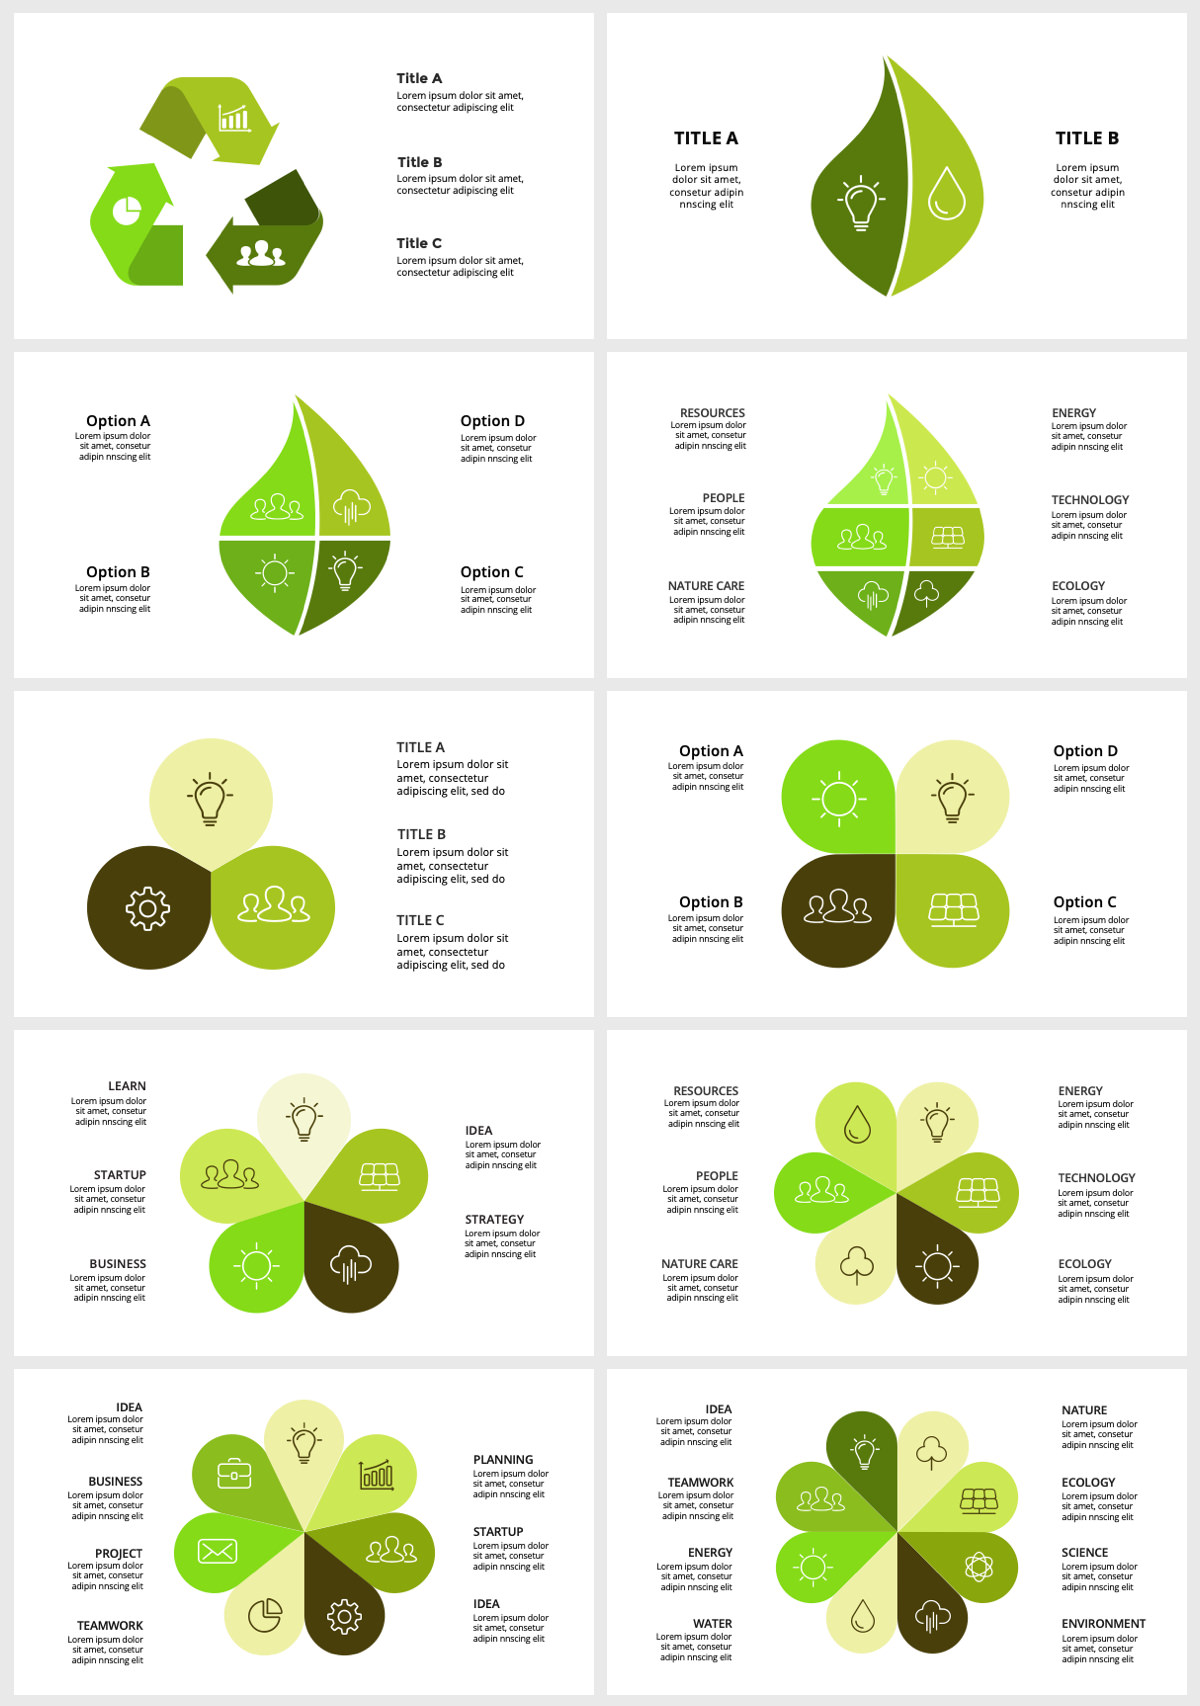 Wowly - 3500 Infographics & Presentation Templates! Updated! PowerPoint Canva Figma Sketch Ai Psd. - 294